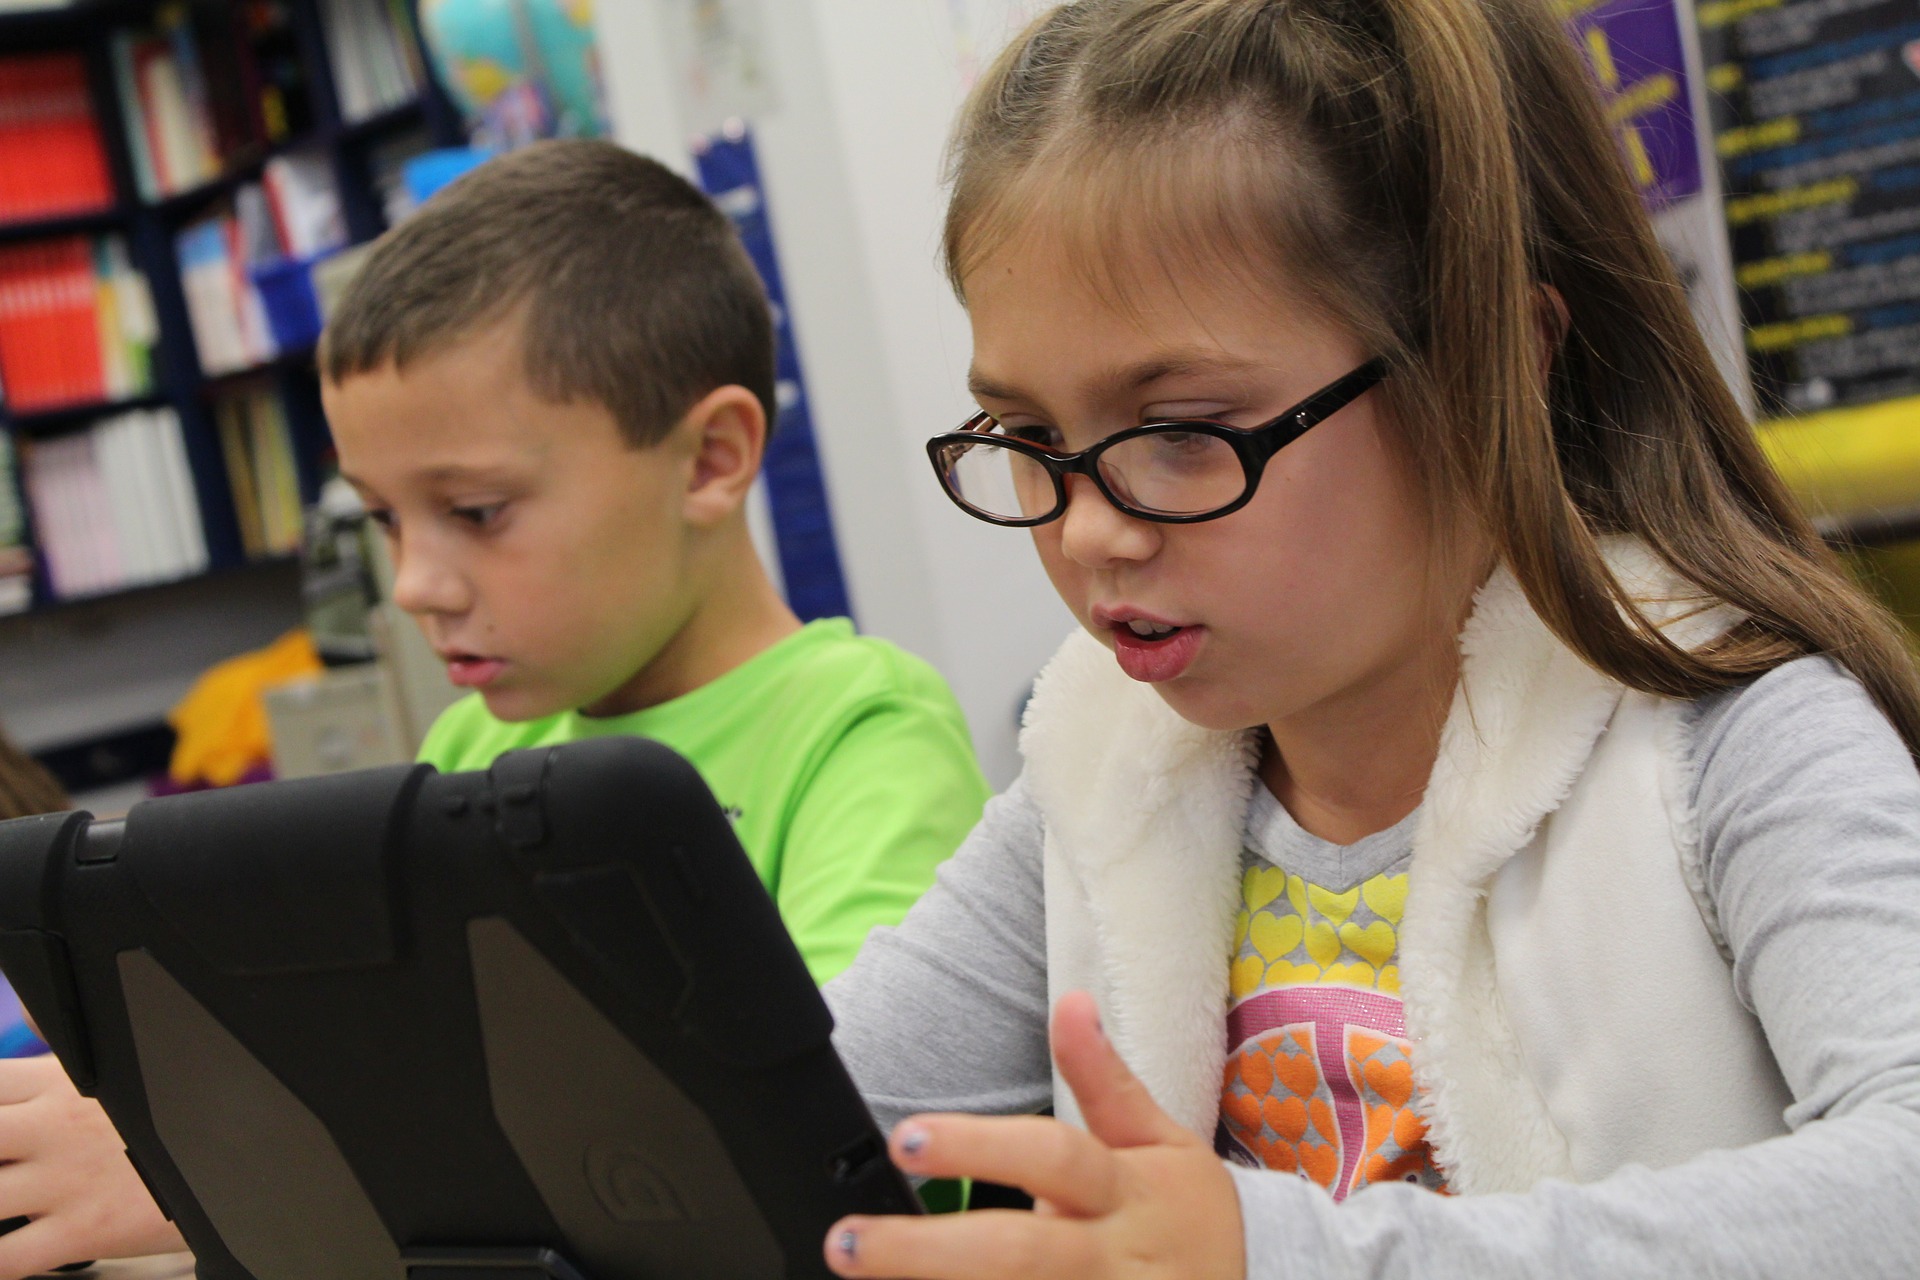 With so many options available, how do you choose the perfect tablet or laptop for your child?